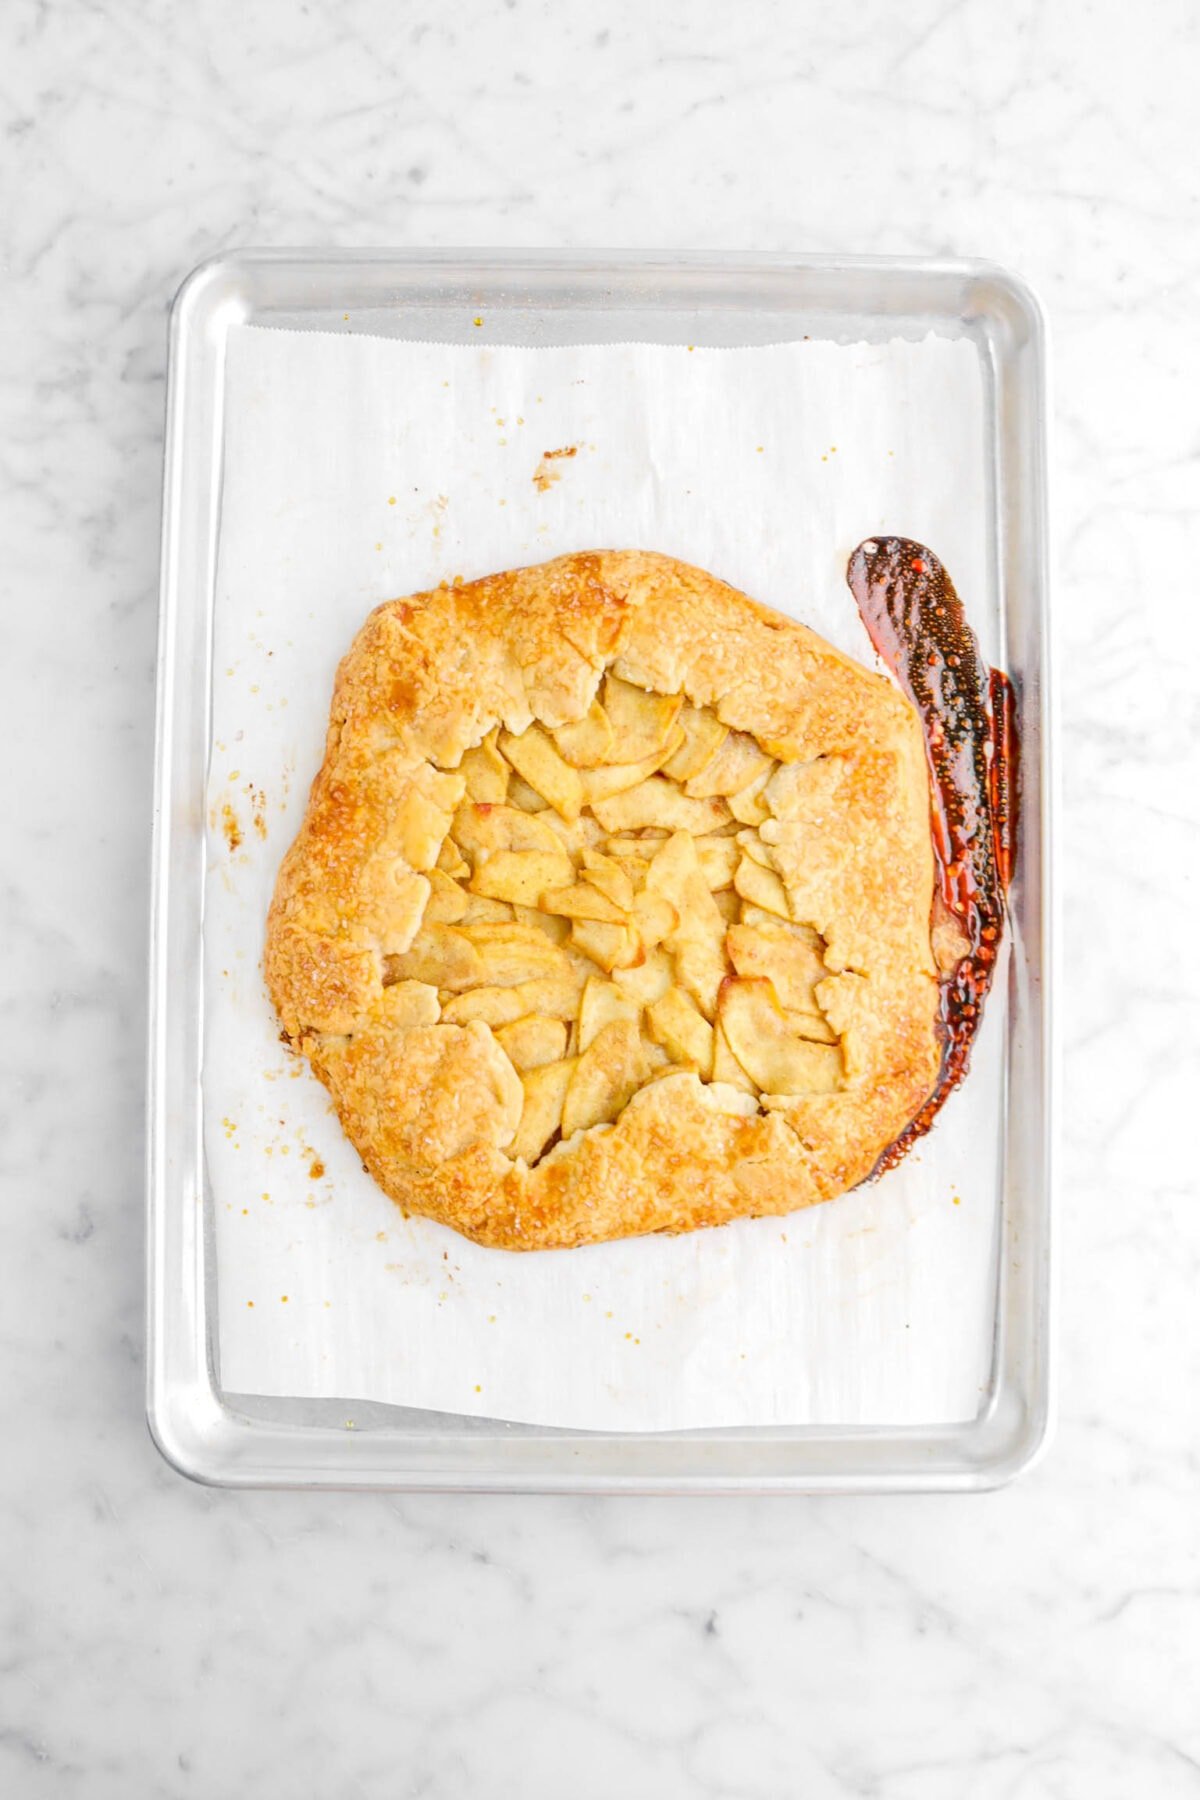 baked galette on sheet pan